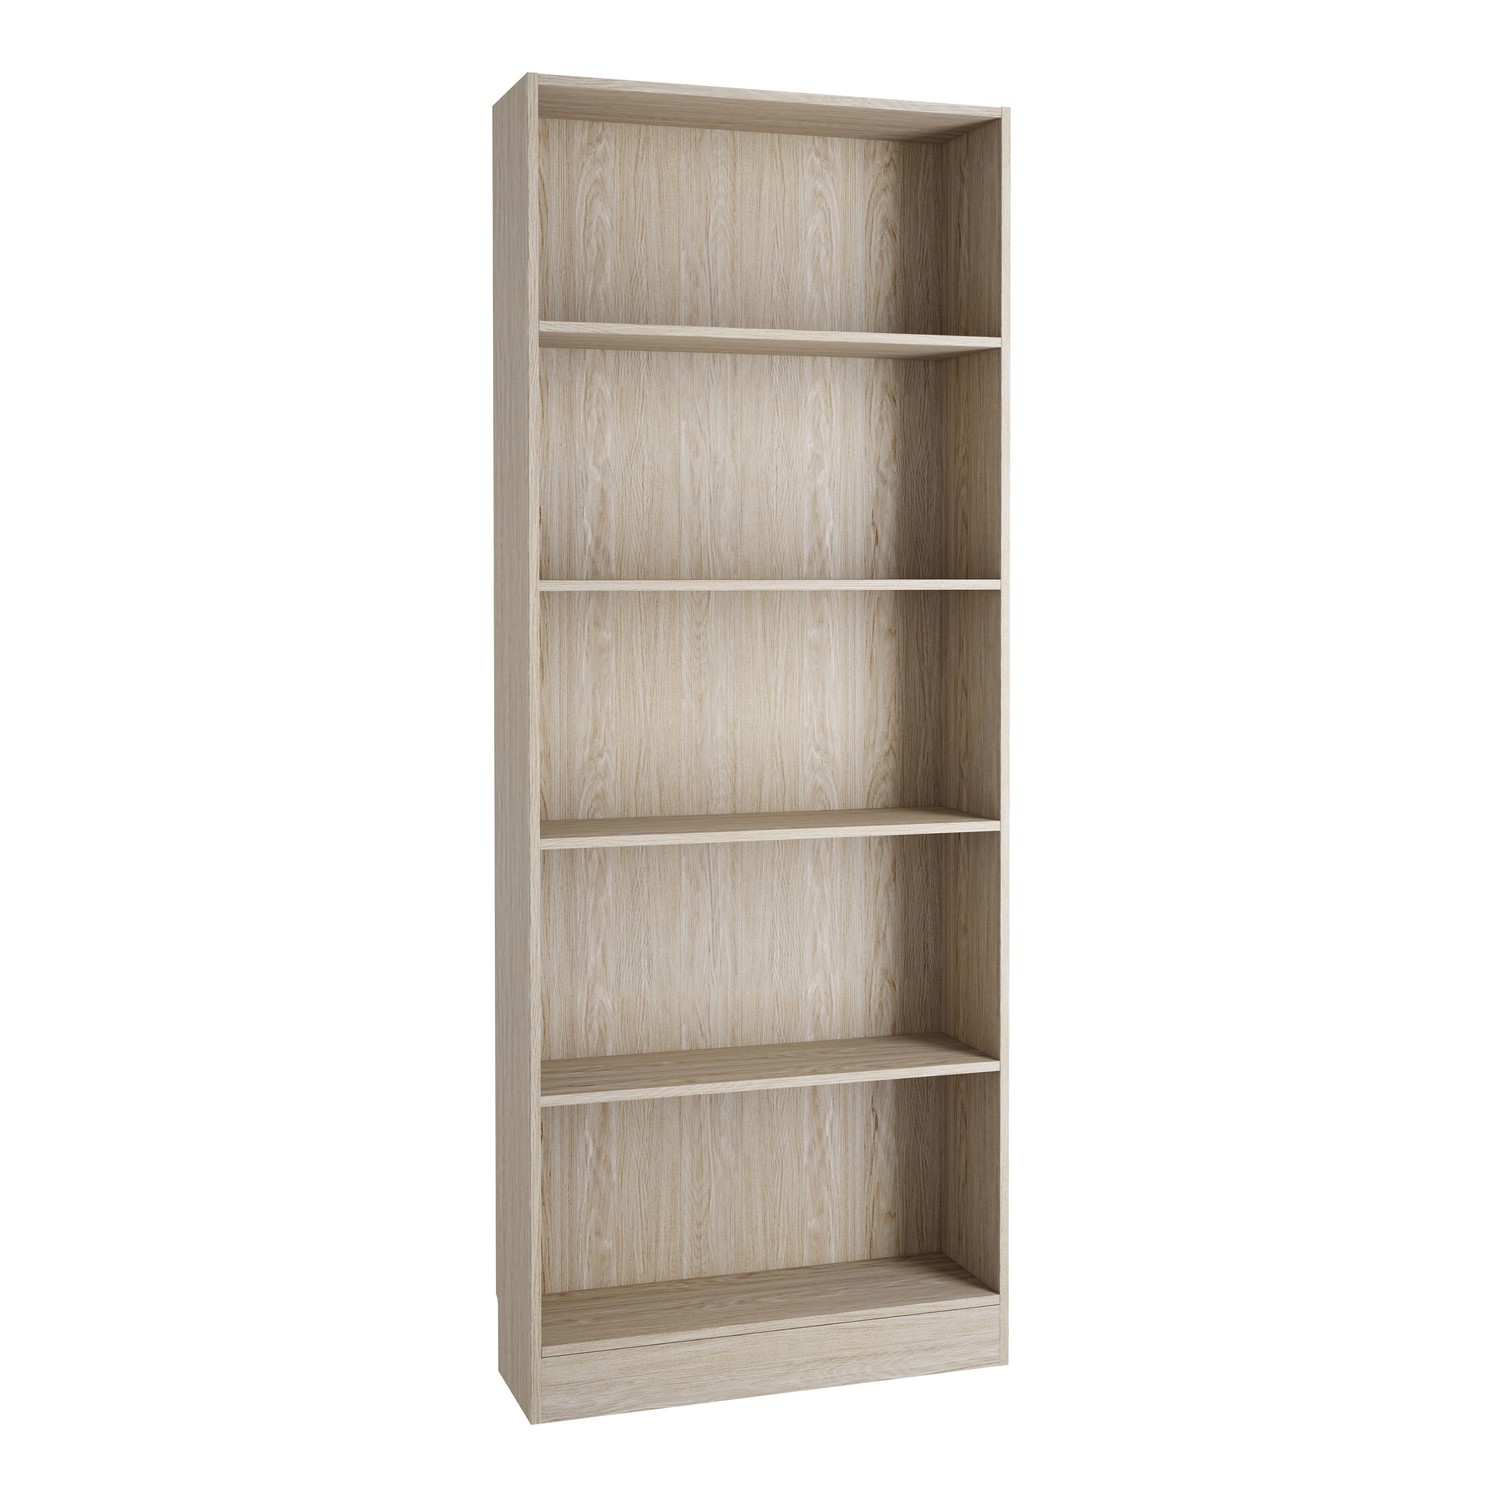 Photo of Tall and wide oak bookcase - basic